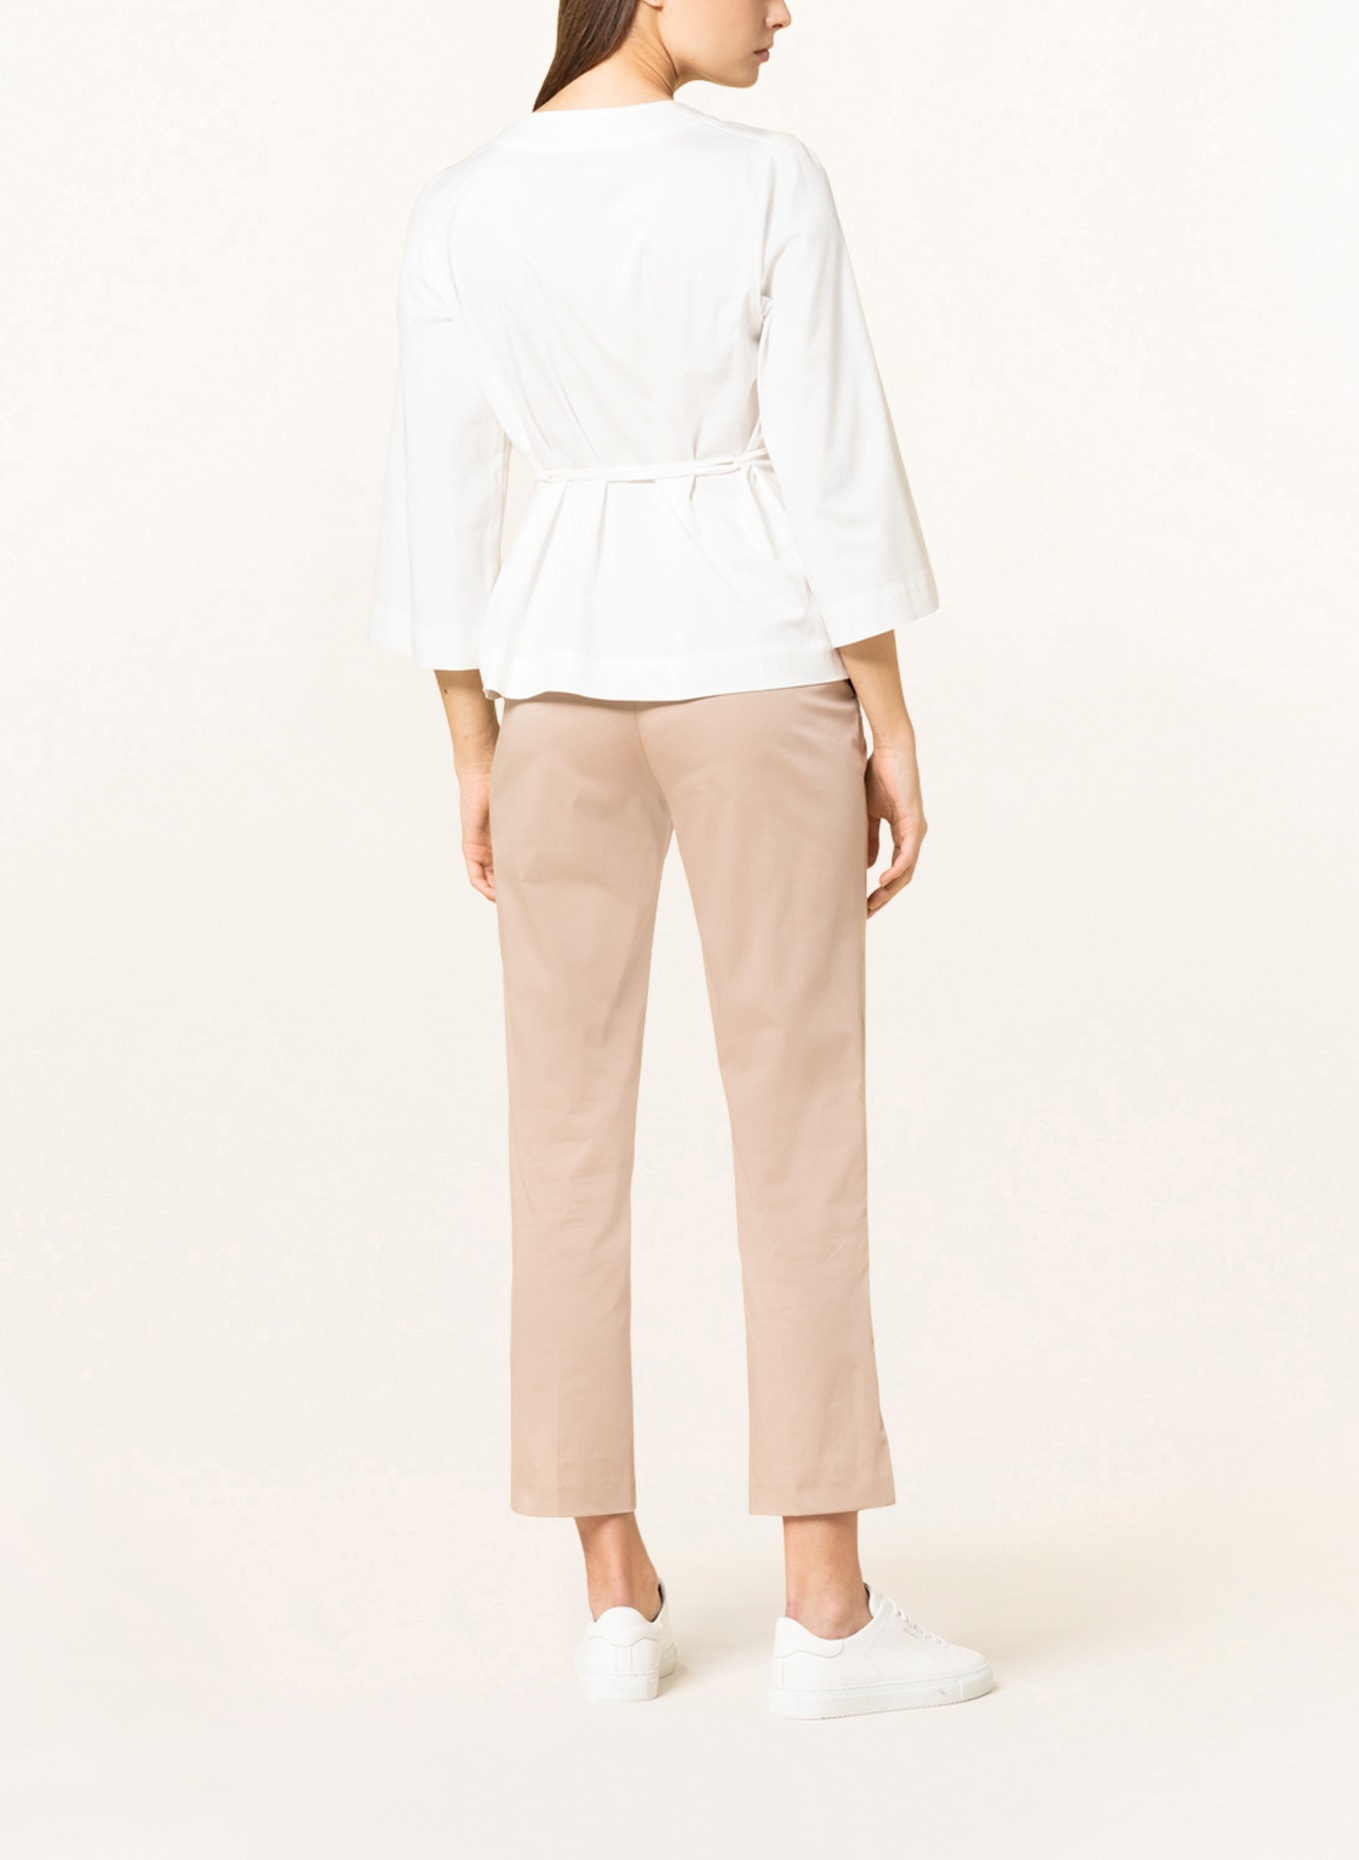 MARC CAIN Shirt blouse with 3/4 sleeves, Color: 110 off (Image 3)